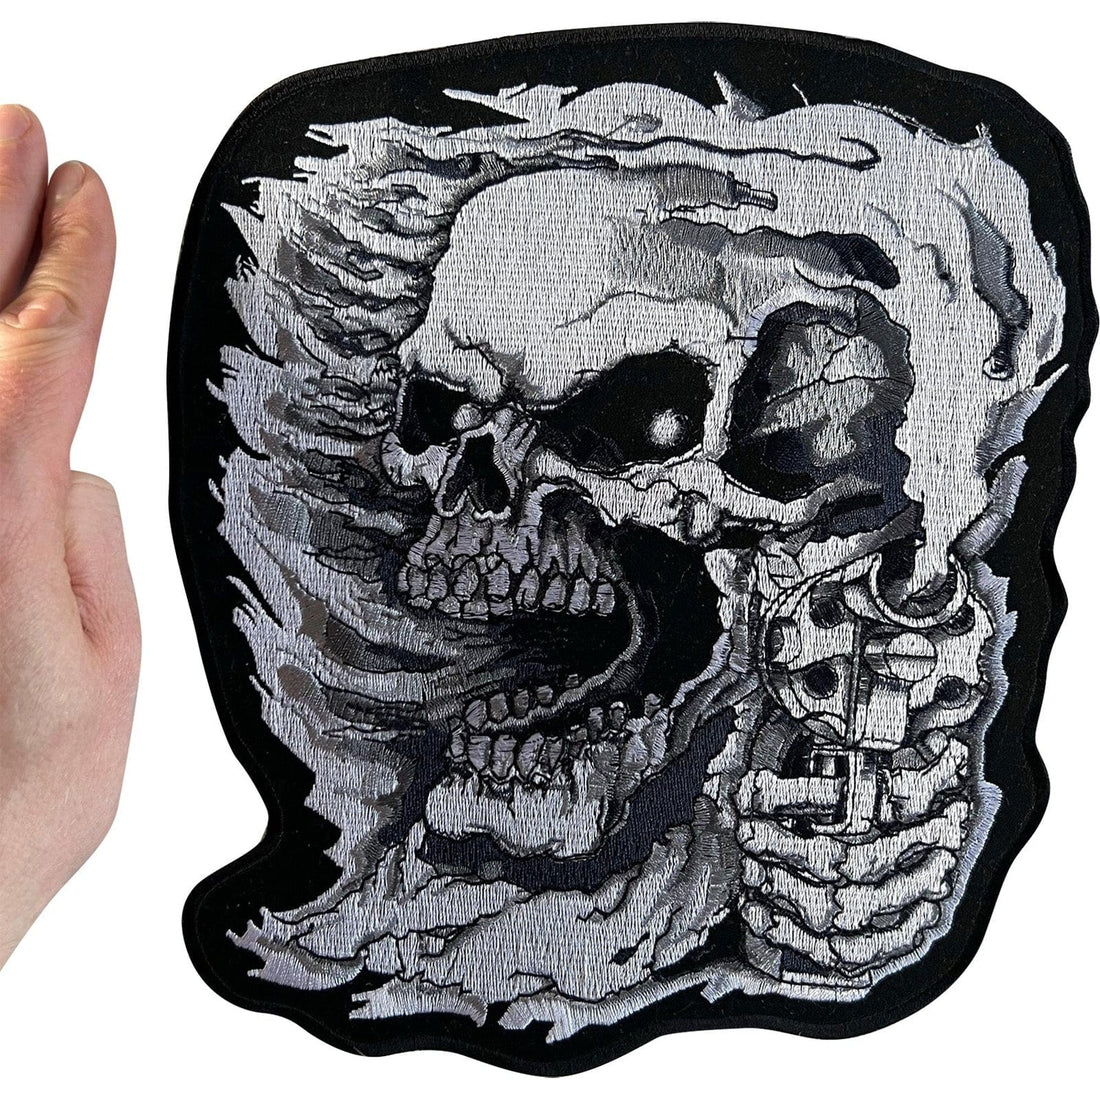 Riding in Style: The Intricate World of Leather Jacket Patches and Biker Culture